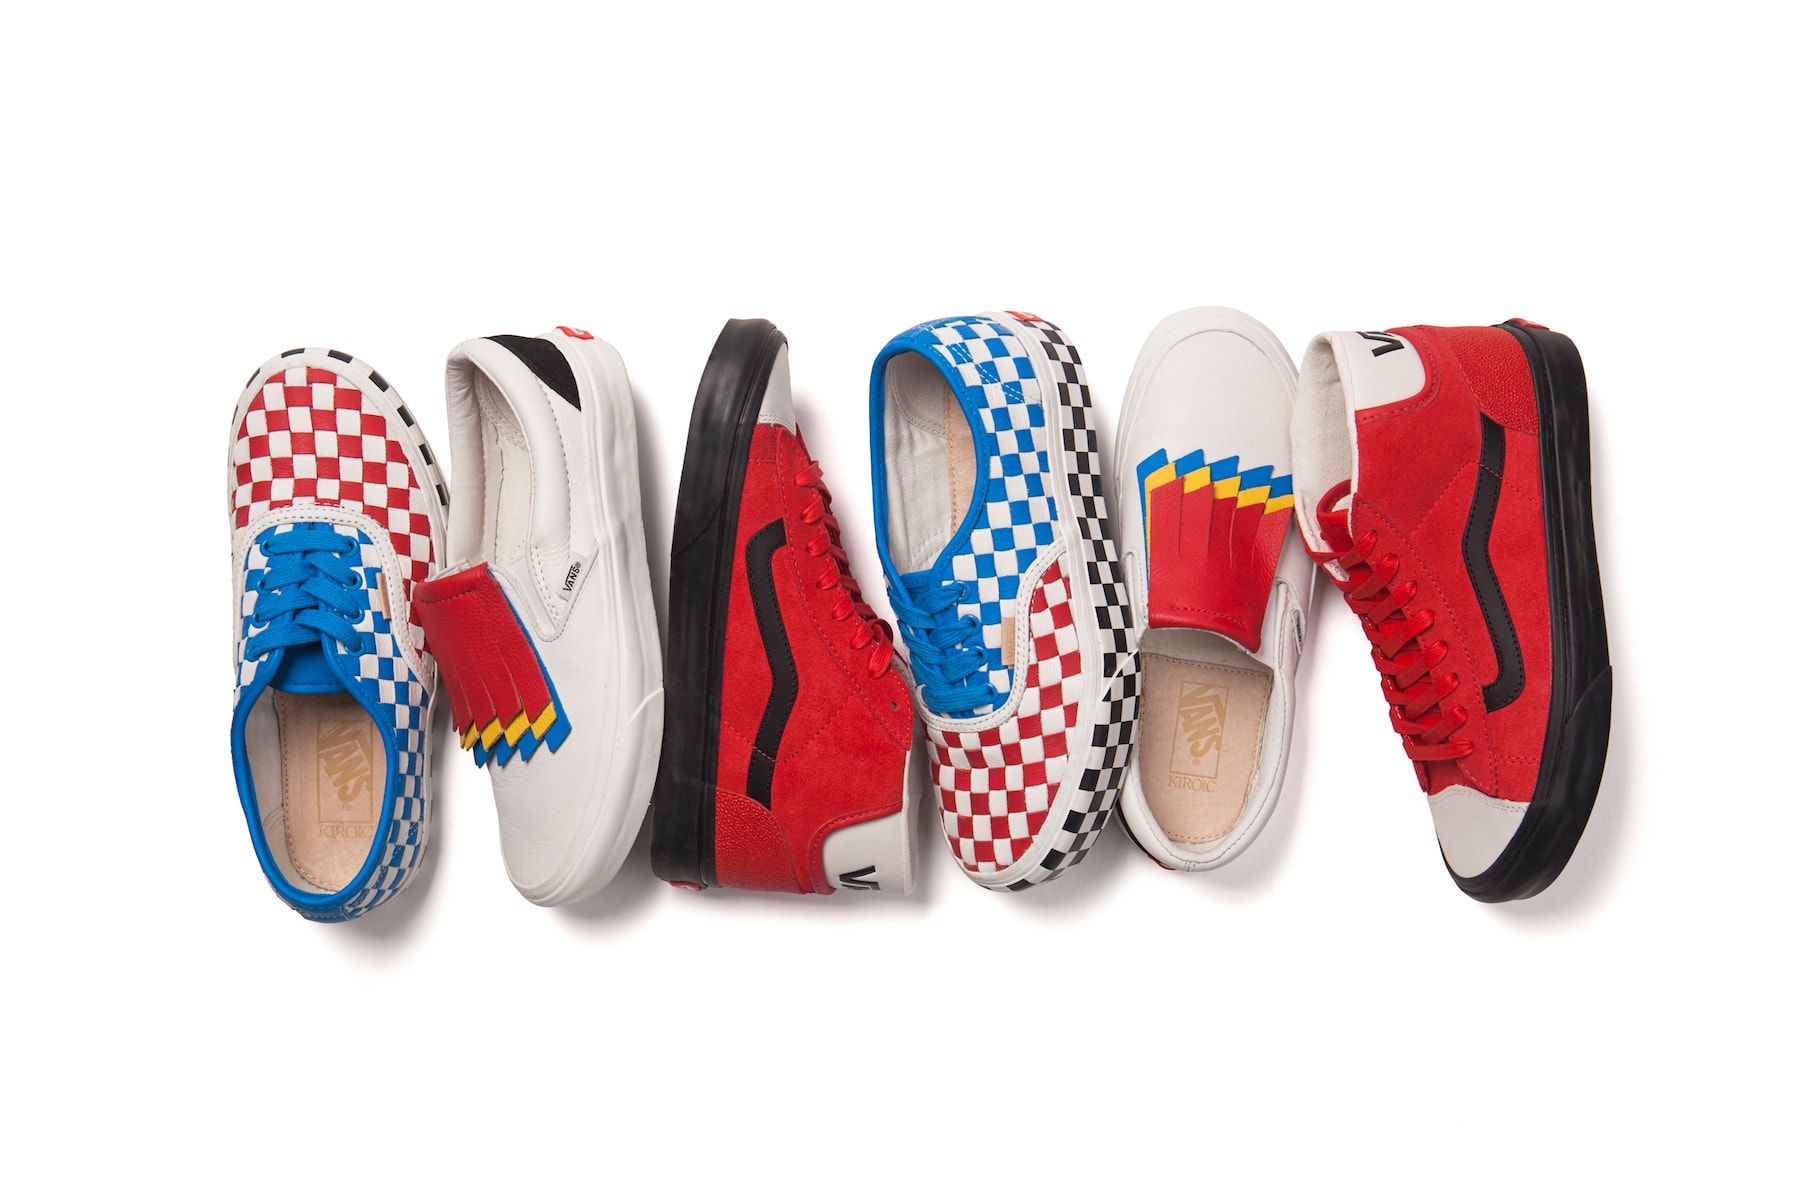 Vans by Kiroic 2016 Year of Rooster